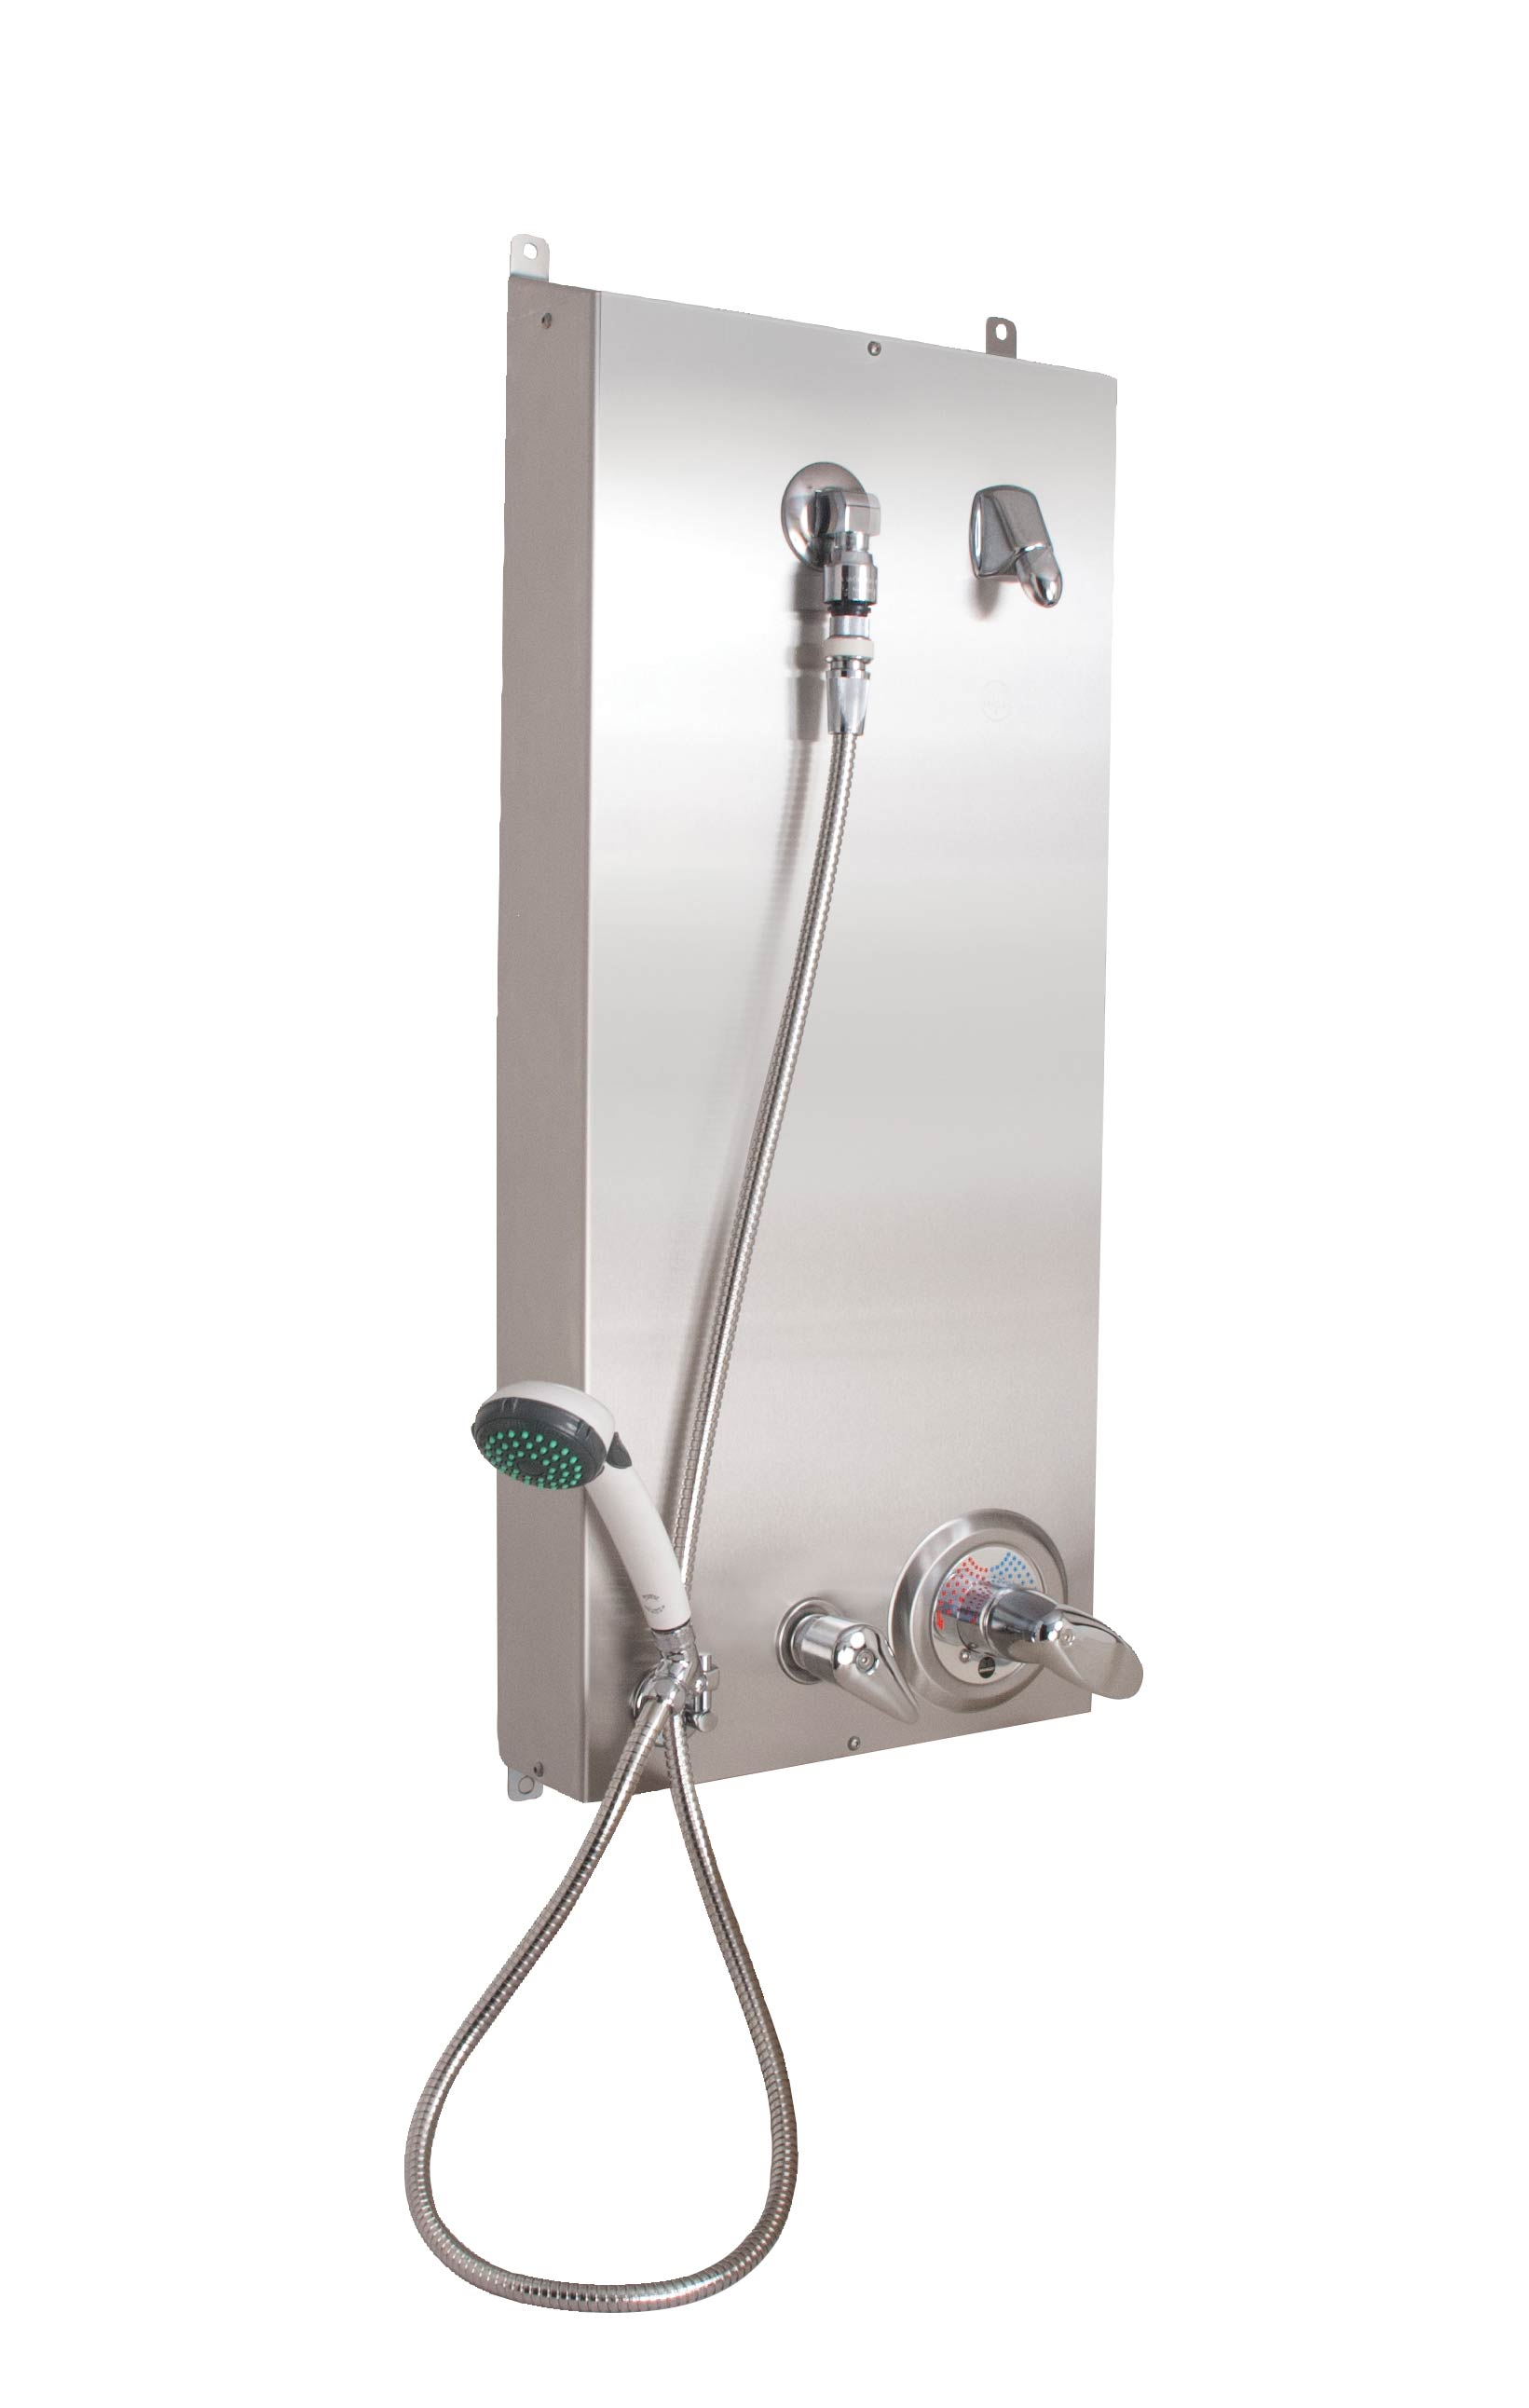 Wall mounted ADA-compliant shower with a handheld showerhead at the end of a stainless steel hose